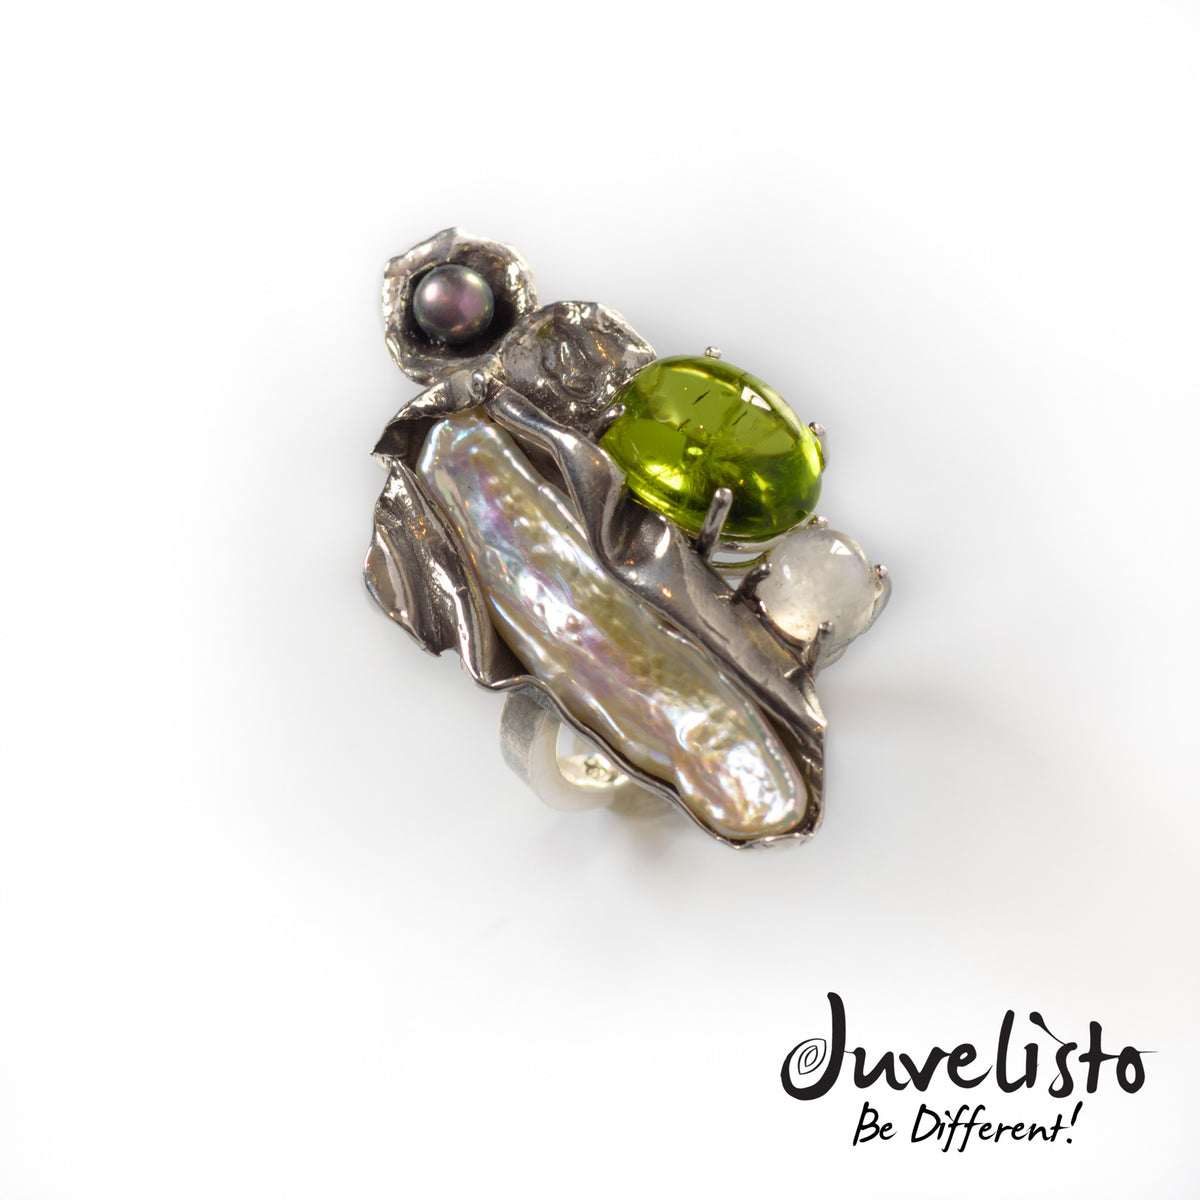 Juvelisto Design  Sterling Silver Fold Formed Pearl Peridot Ring